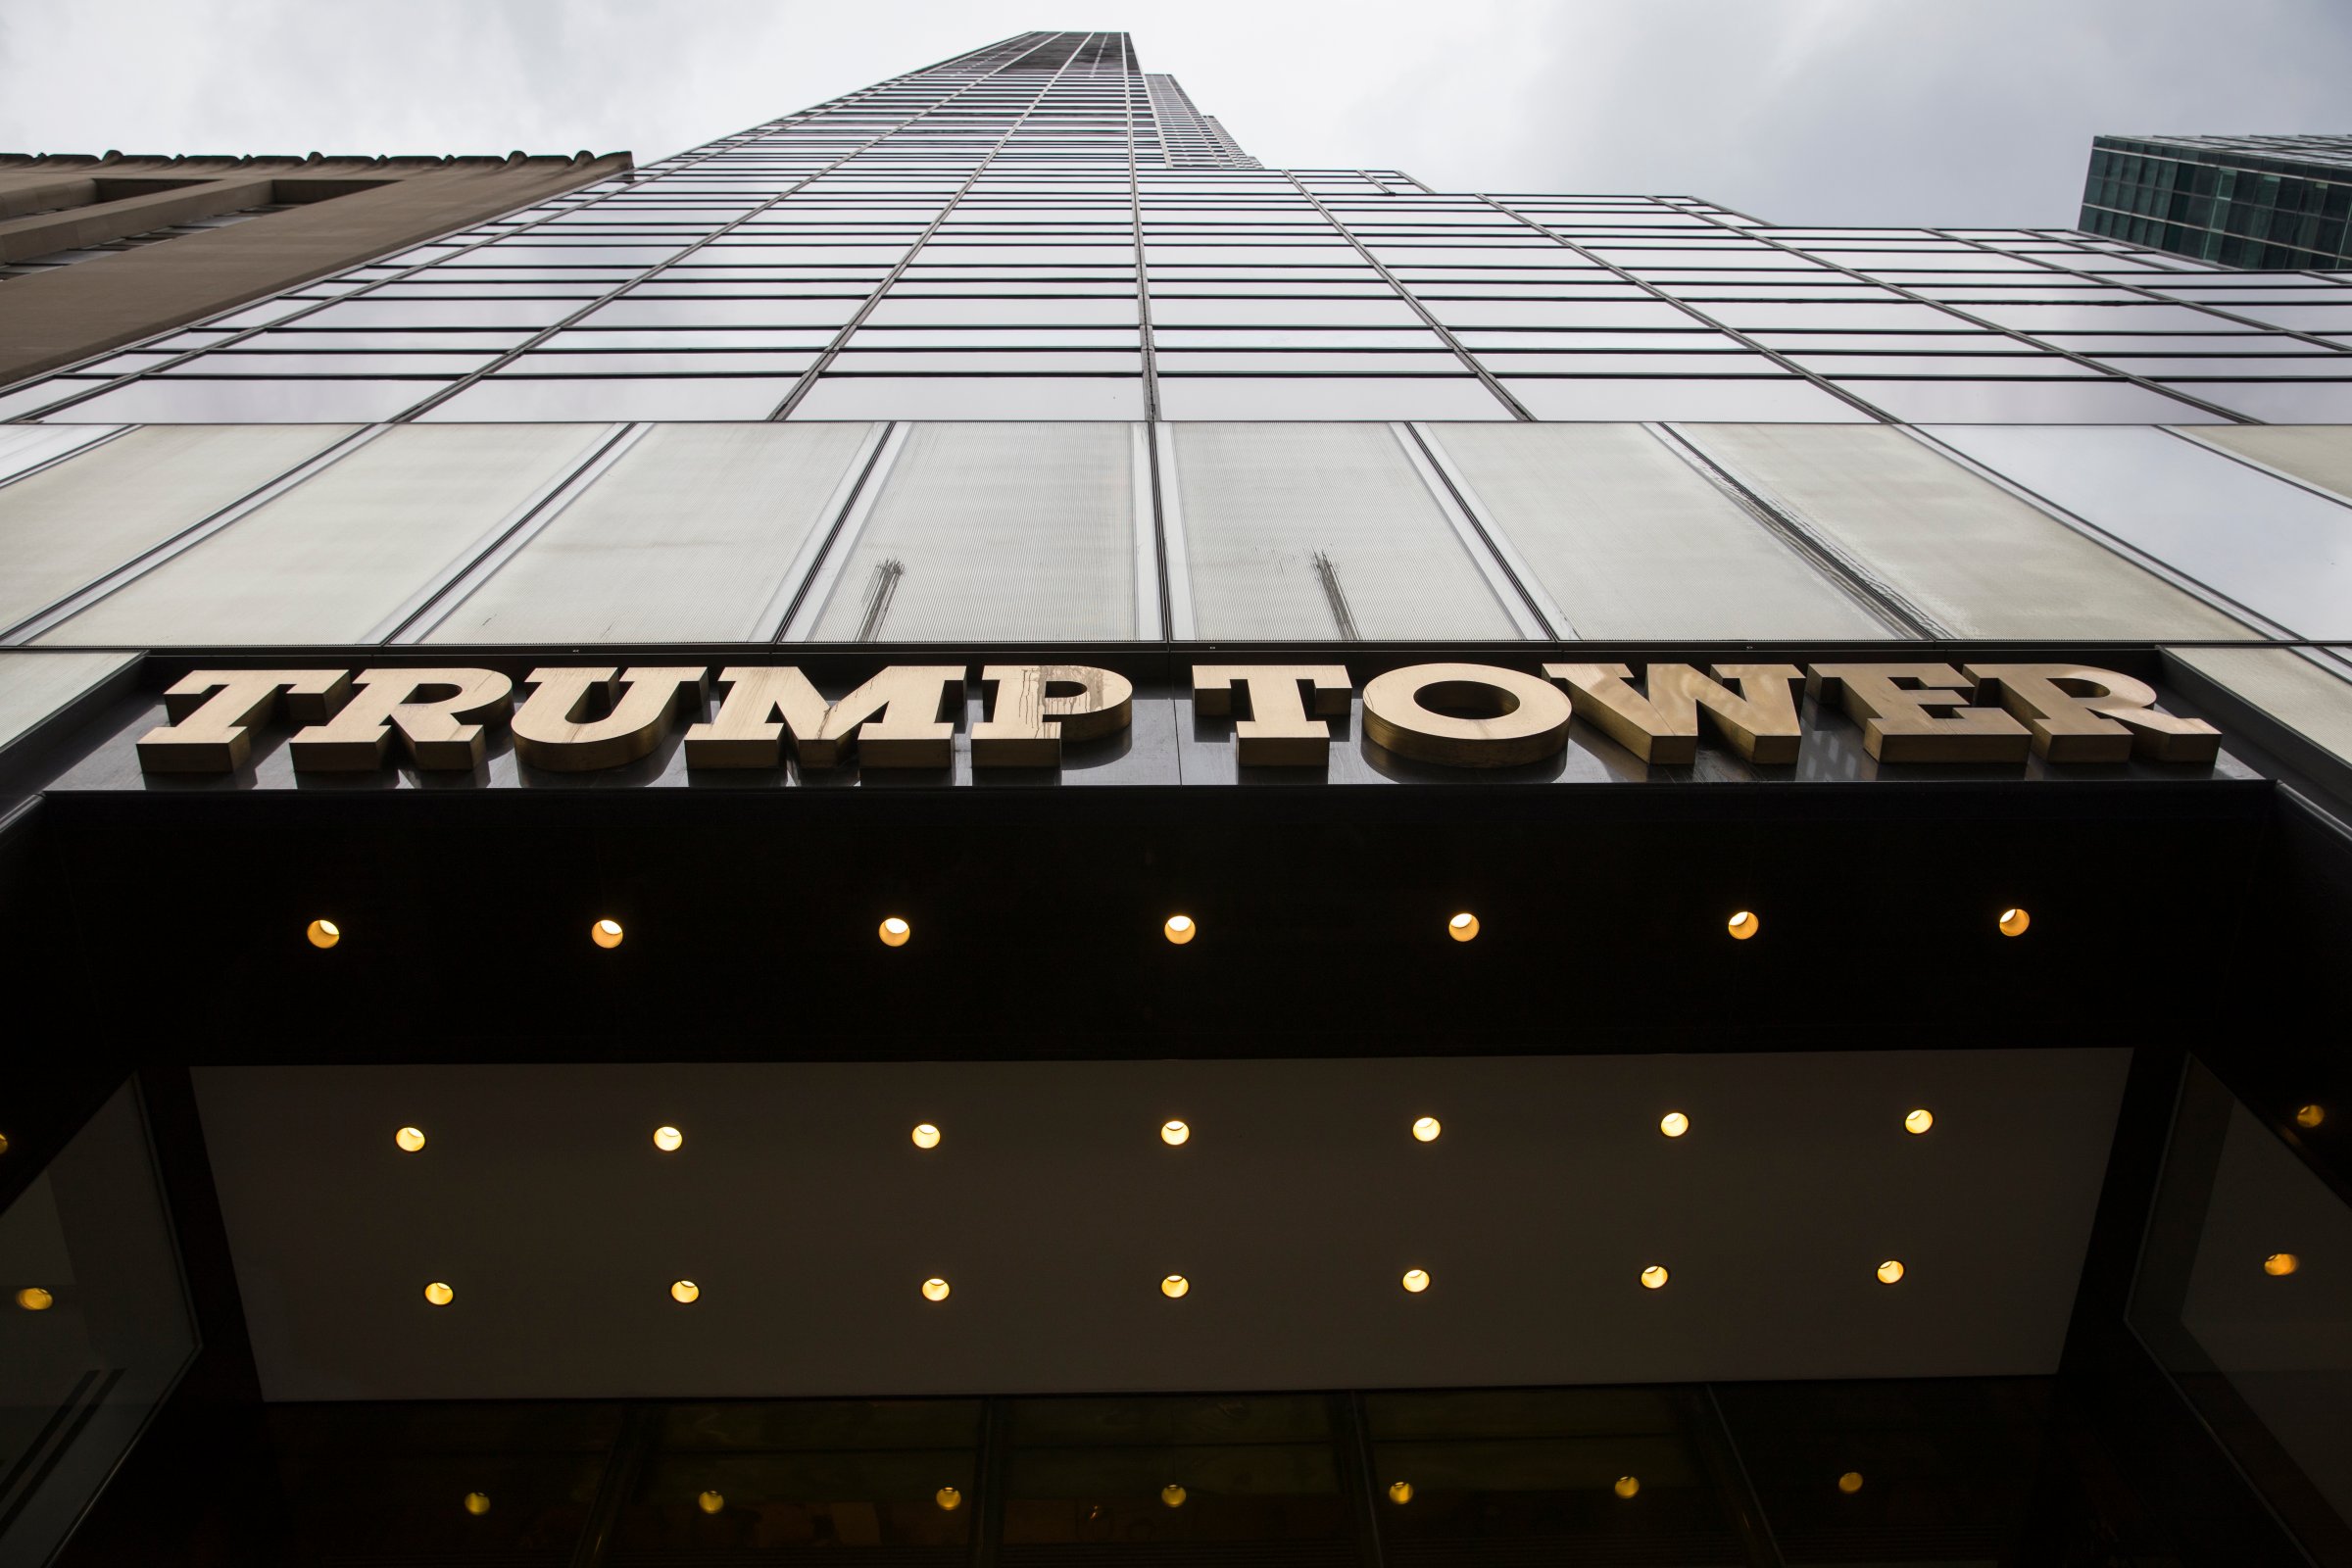 President Trump To Return To Trump Tower In New York City For First Time Since Taking Office